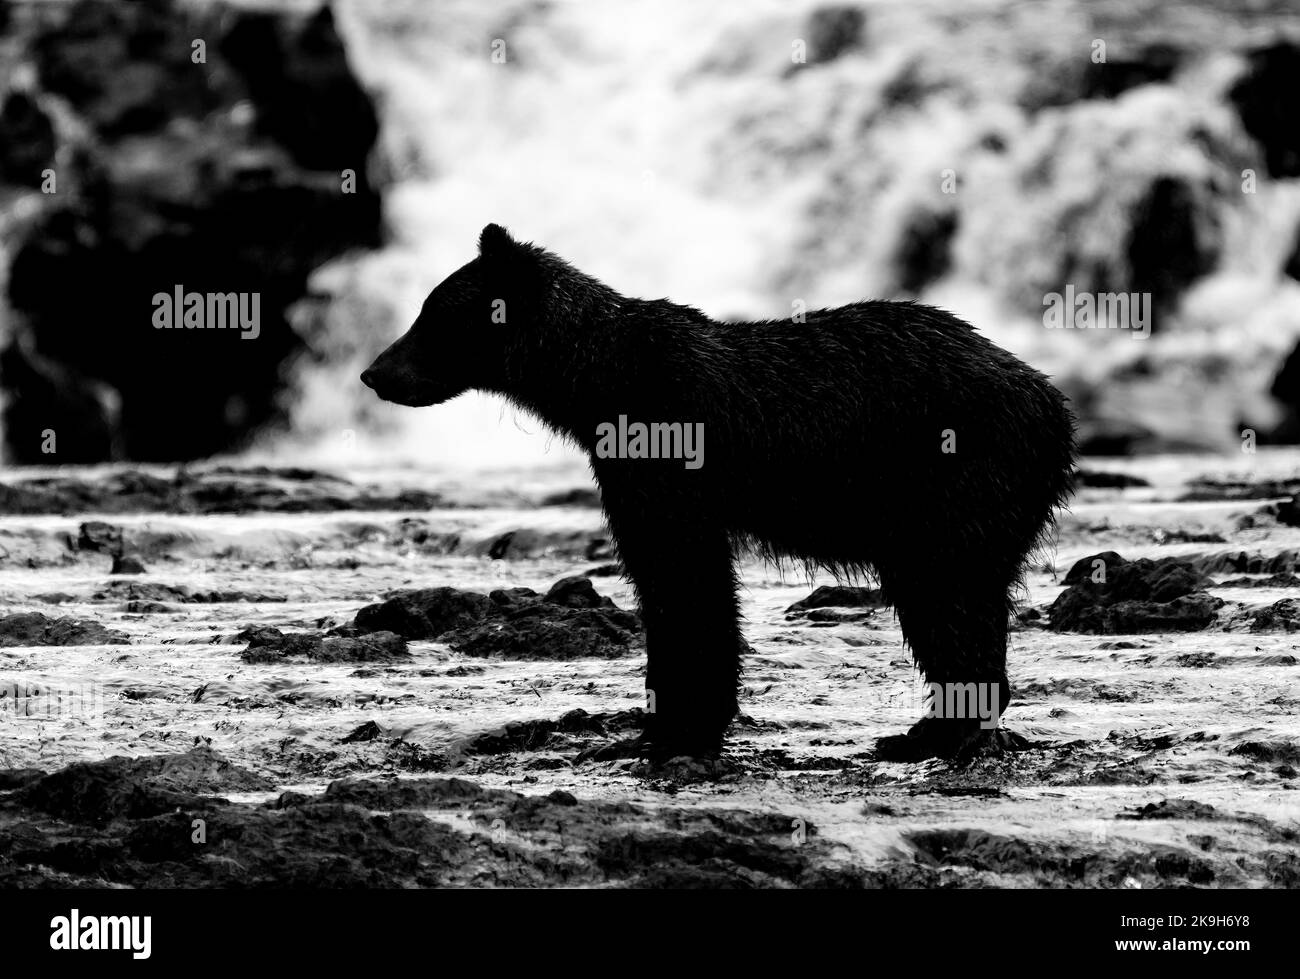 Monochrome photo of a side view of a young grizzly bear (Ursus arctos horribilis) in front of a waterfall in Alaska, USA. Stock Photo